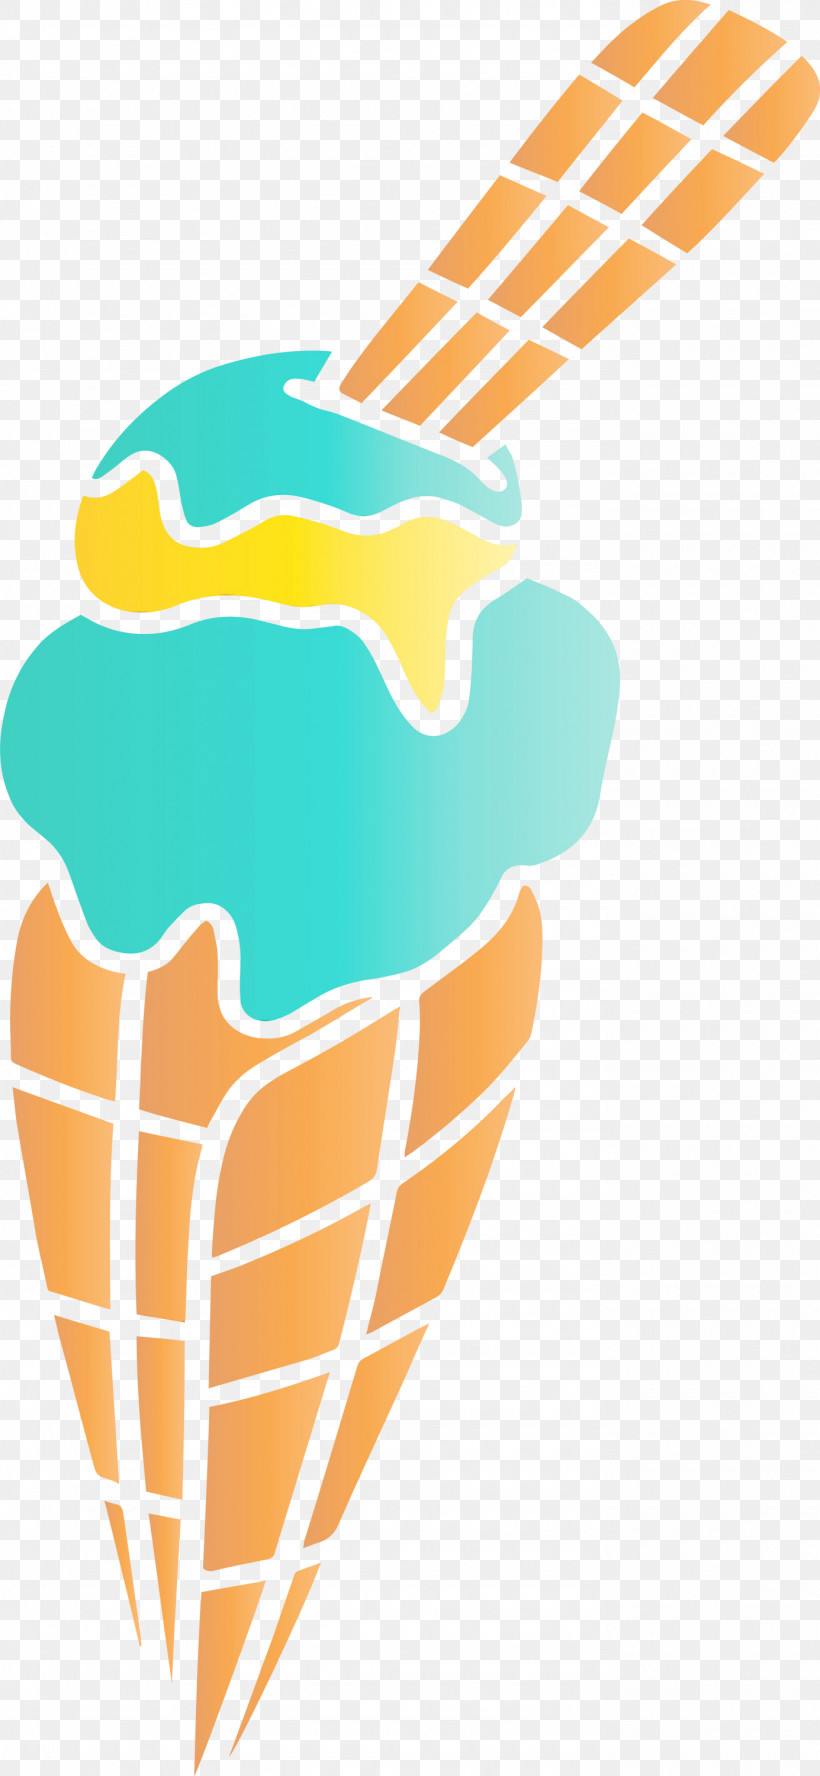 Ice Cream Cone Line Pattern Cone Meter, PNG, 1385x3000px, Ice Cream, Cone, Ice Cream Cone, Line, Meter Download Free